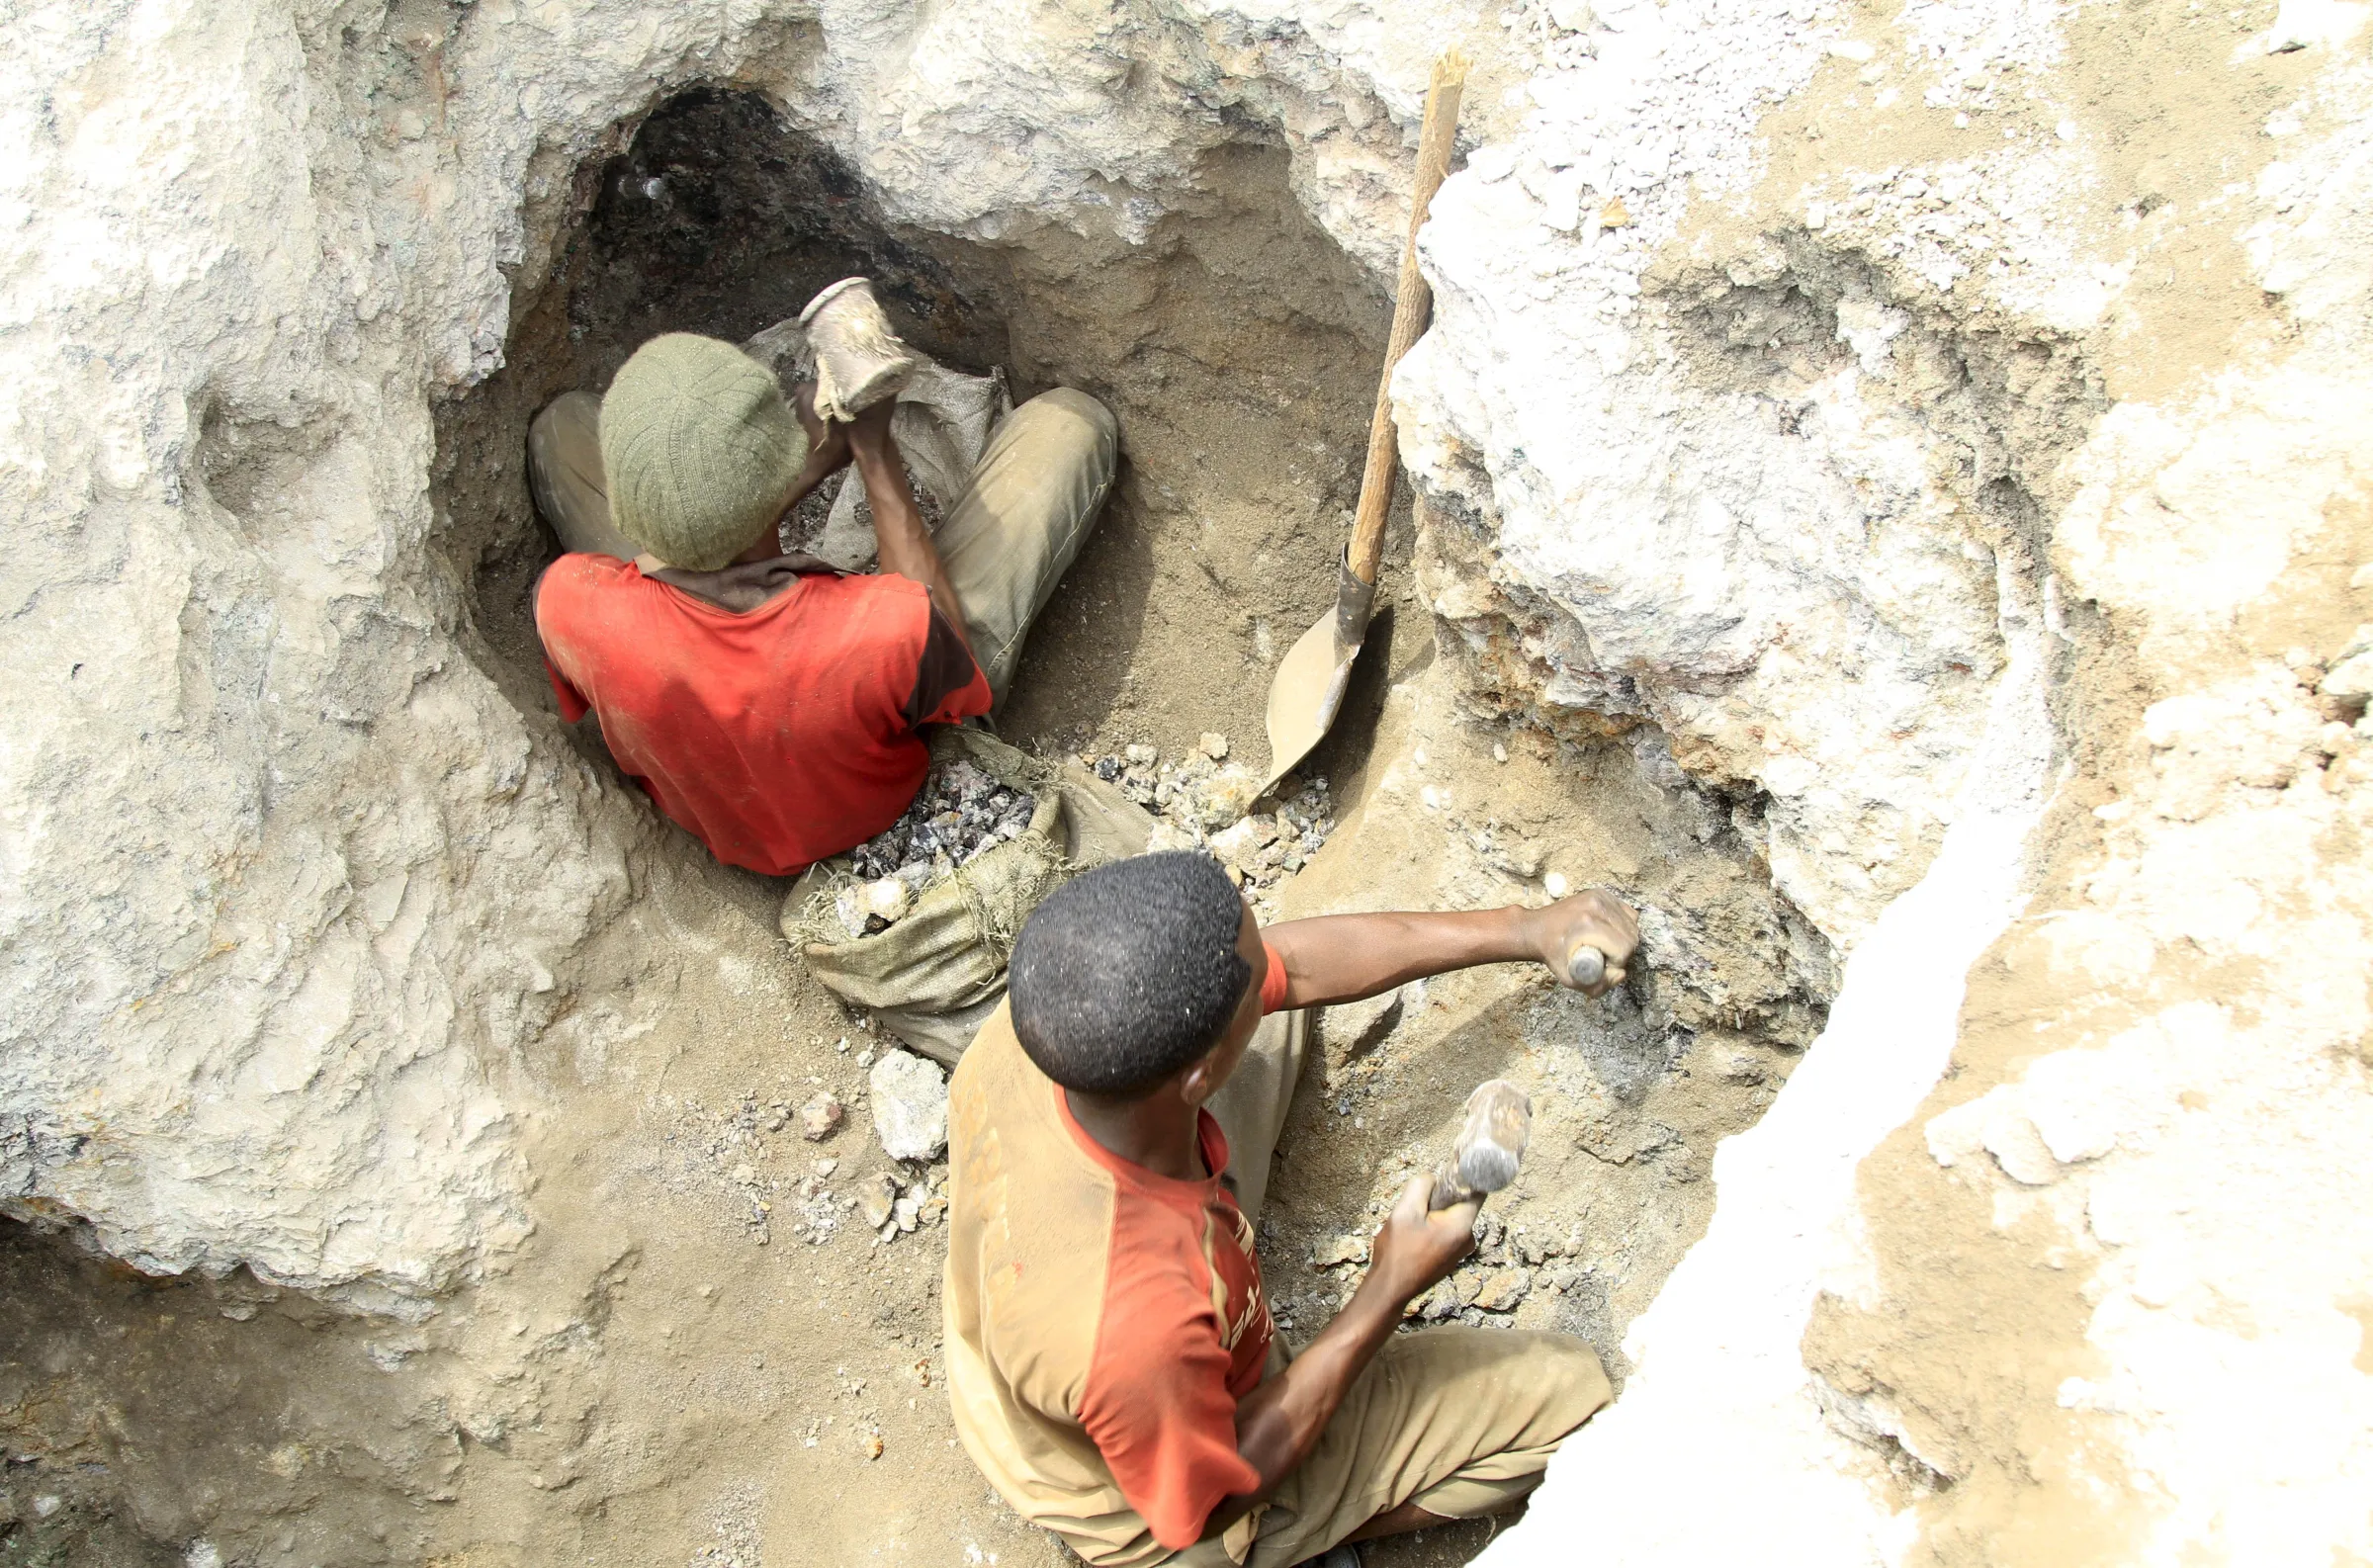 Artisanal miners work at a cobalt mine-pit in Tulwizembe, Katanga province, Democratic Republic of Congo